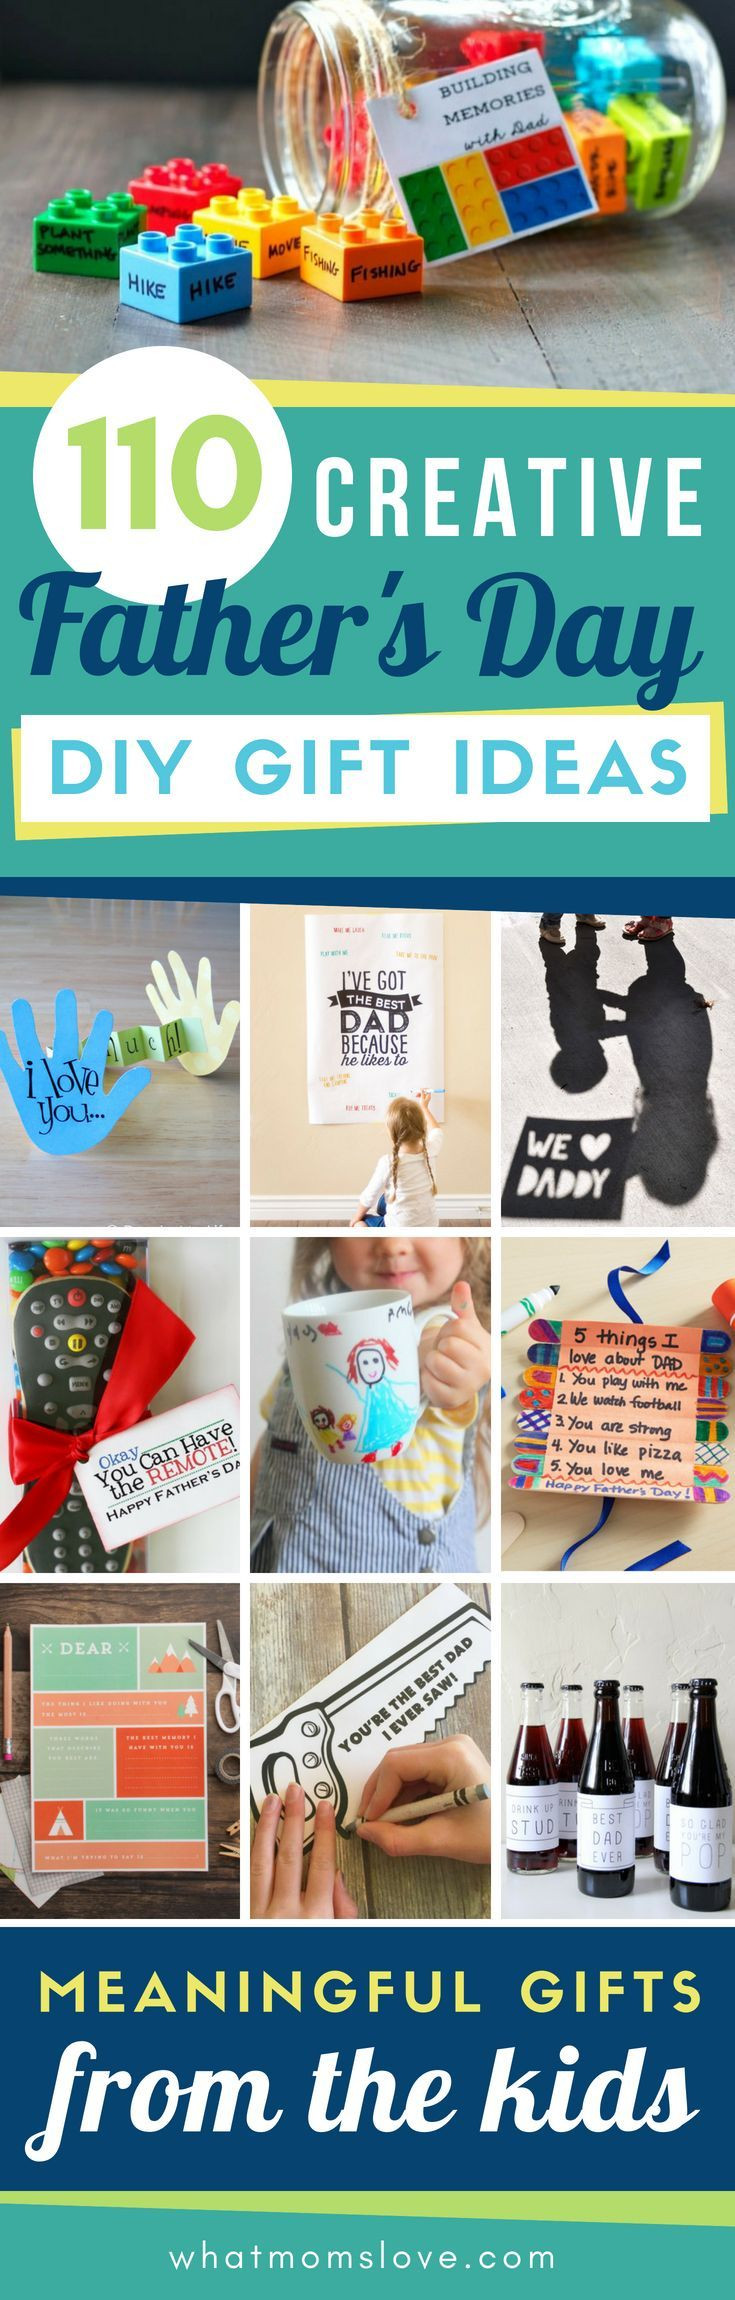 Father'S Day Gift Ideas From Son
 100 Incredible DIY Father s Day Gift Ideas From Kids